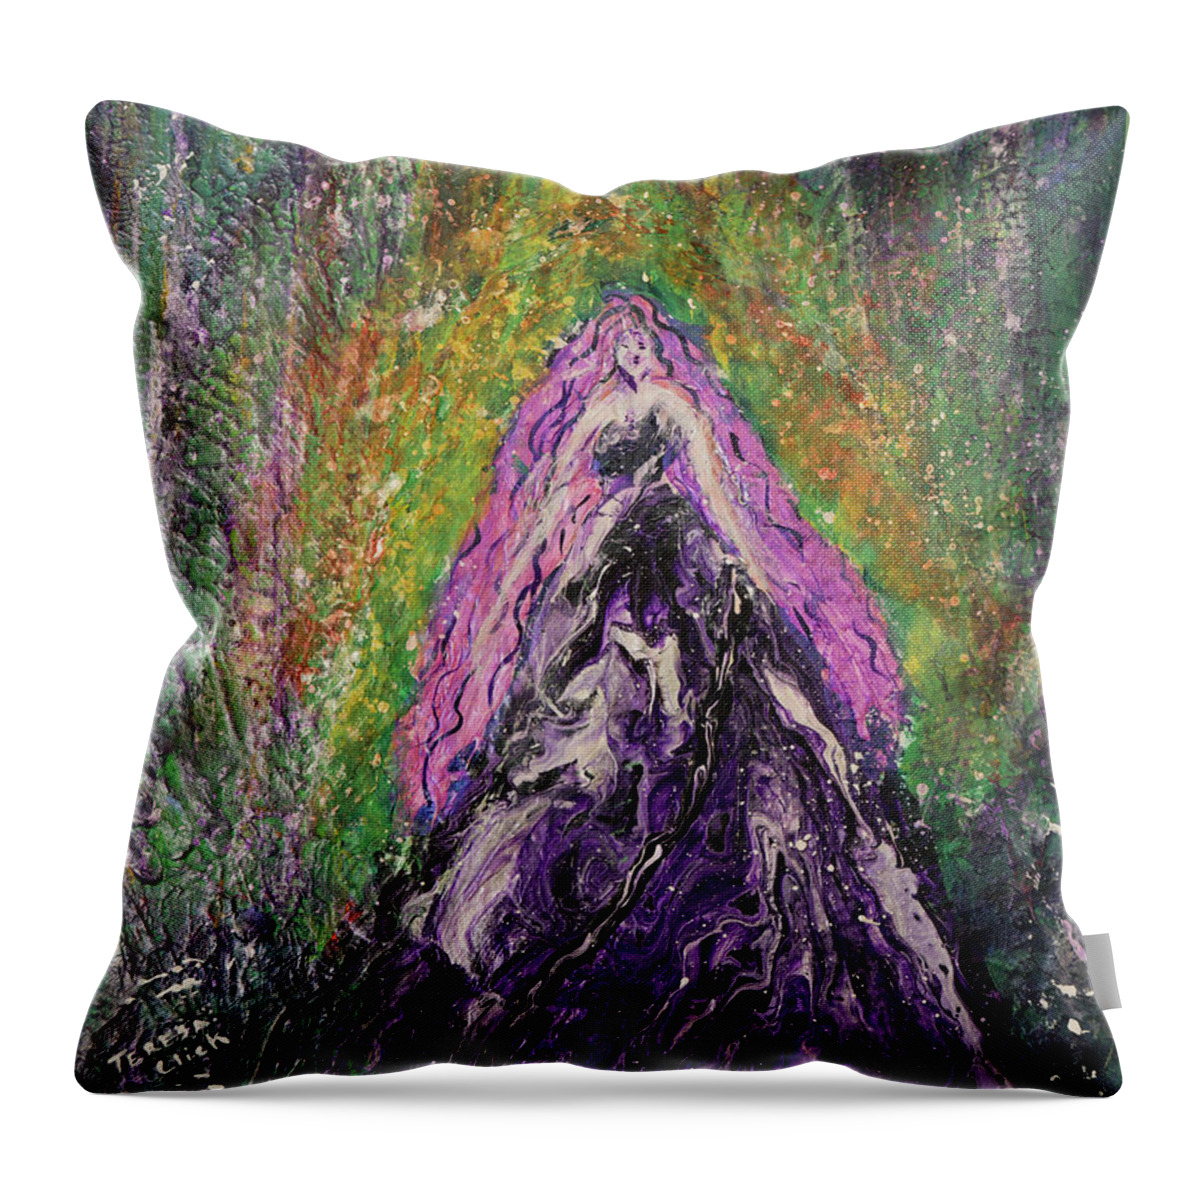 Princess In The Forest Throw Pillow featuring the painting Princess in the Forest by Tessa Evette